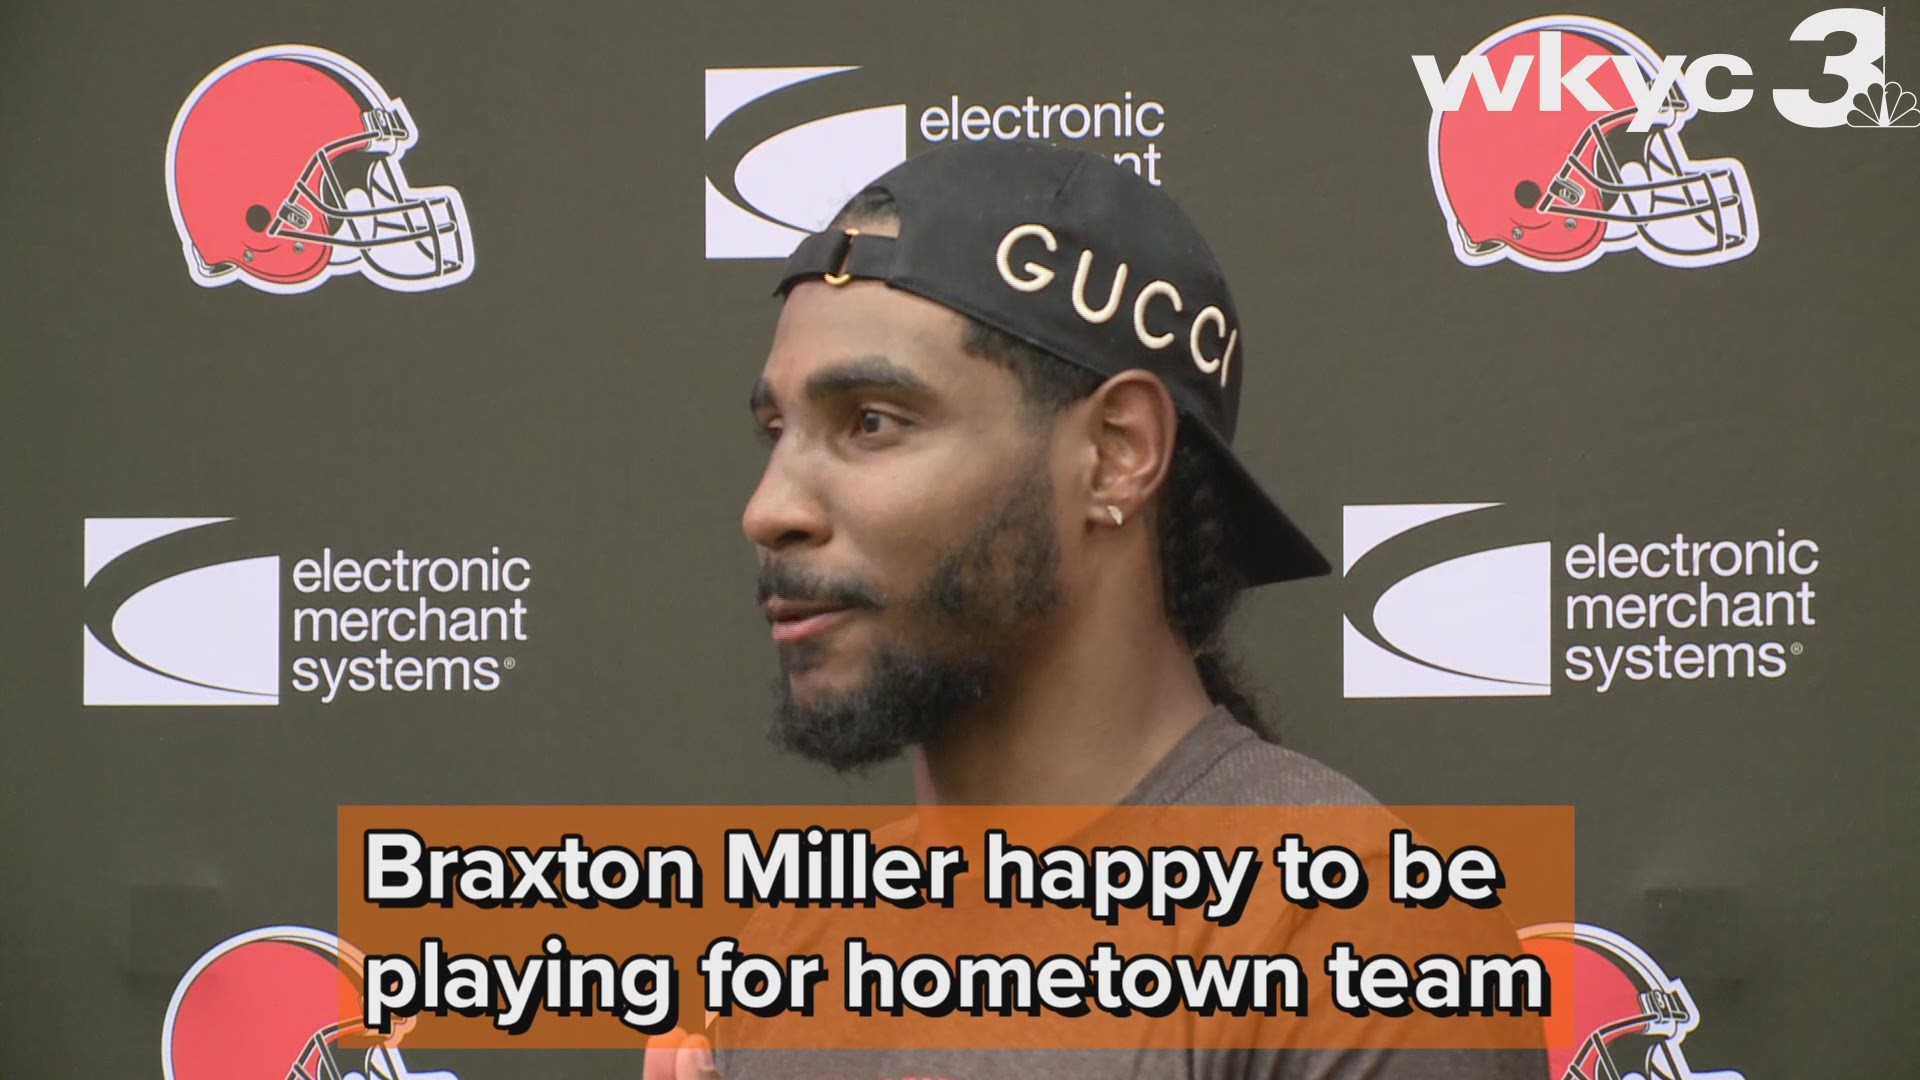 The Cleveland Browns signed former Ohio State star quarterback/wide receiver Braxton Miller to a free agent contract on Wednesday.